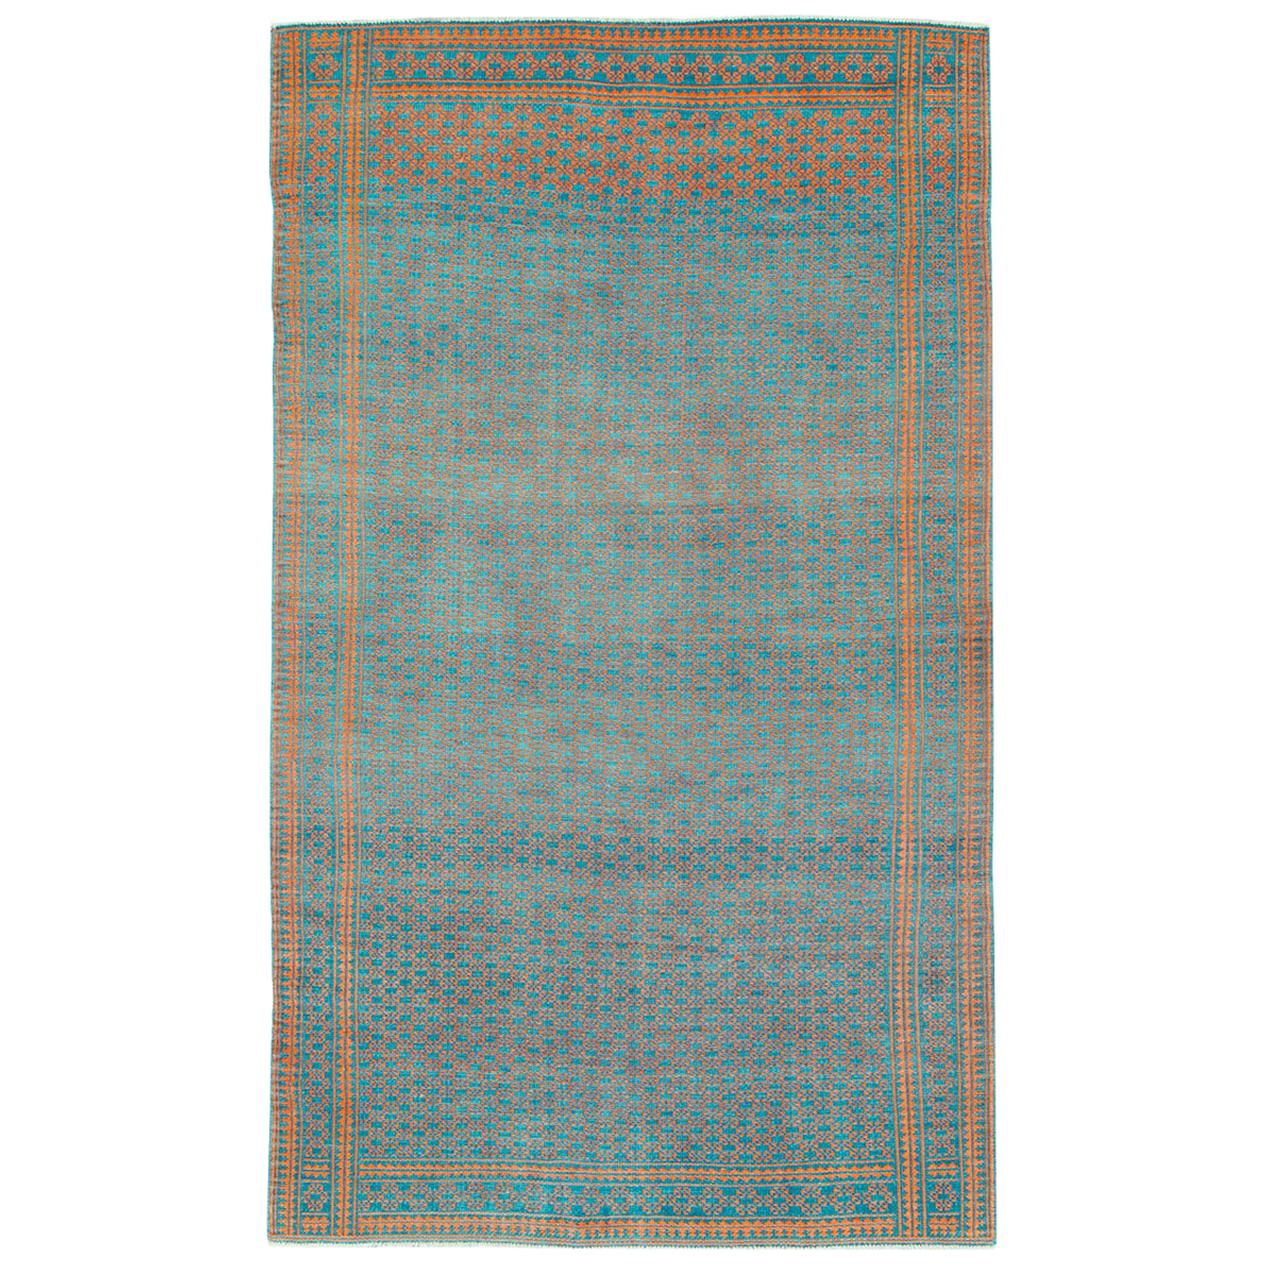 Double-Sided Reversible Mid-20th Century Persian Flat-Weave Kilim Accent Rug